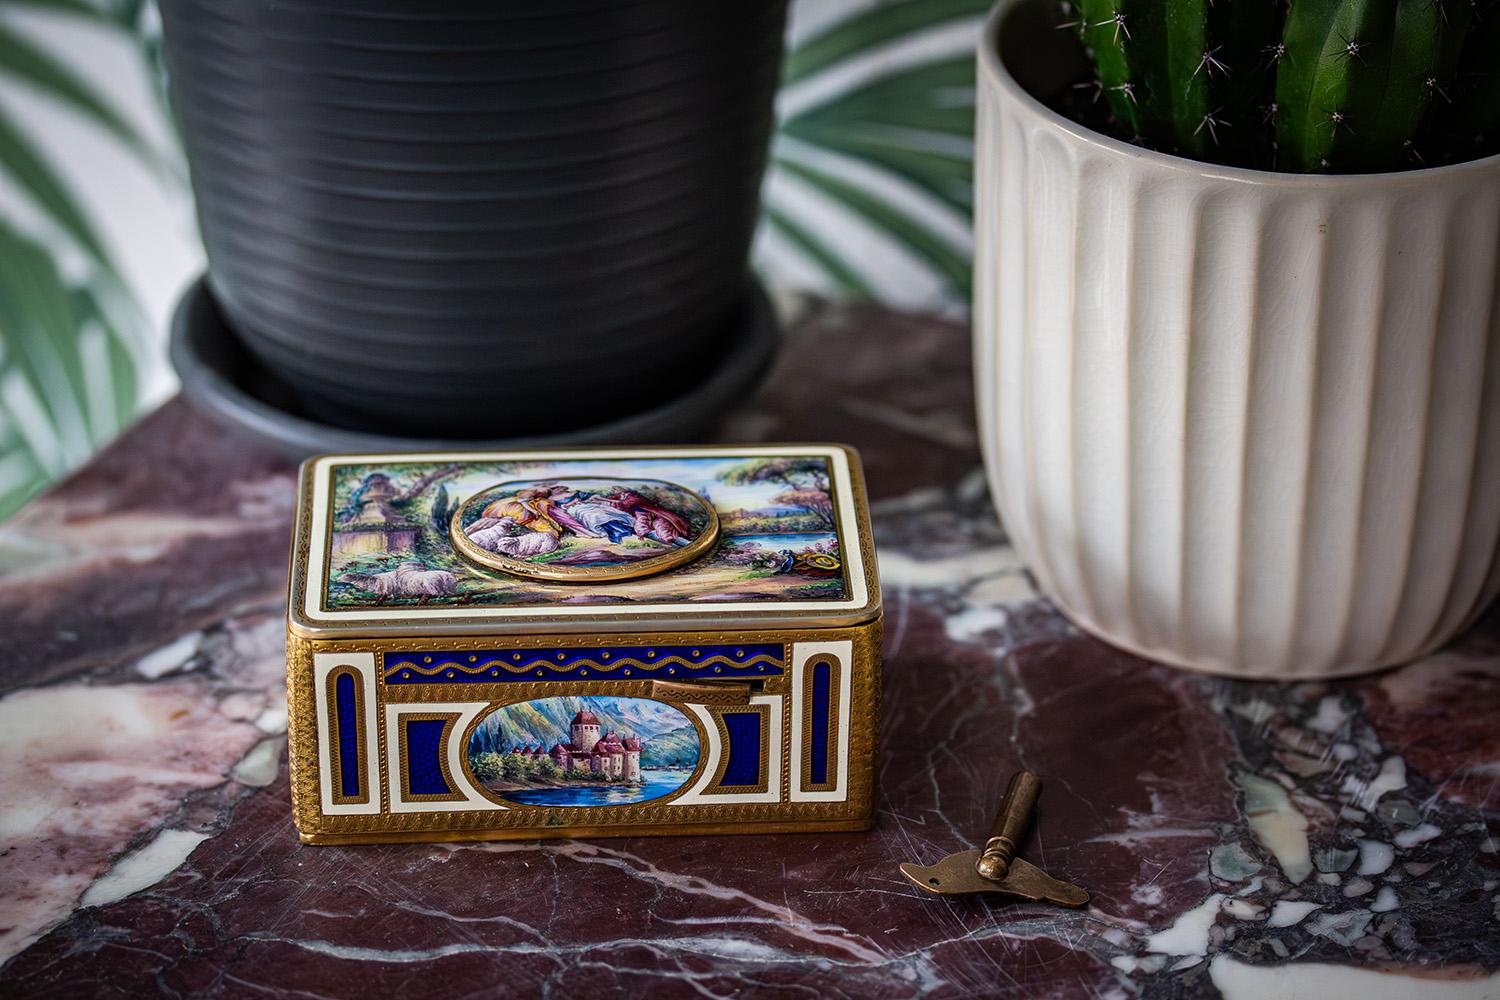 Video audio removed by 1st Dibs, original audio version available please contact us. 

Featuring Enamelled Decoration Signed on the Movement Circa 1930

Singing Bird Music Box. The music box of rectangular form extensively decorated in enamel with a